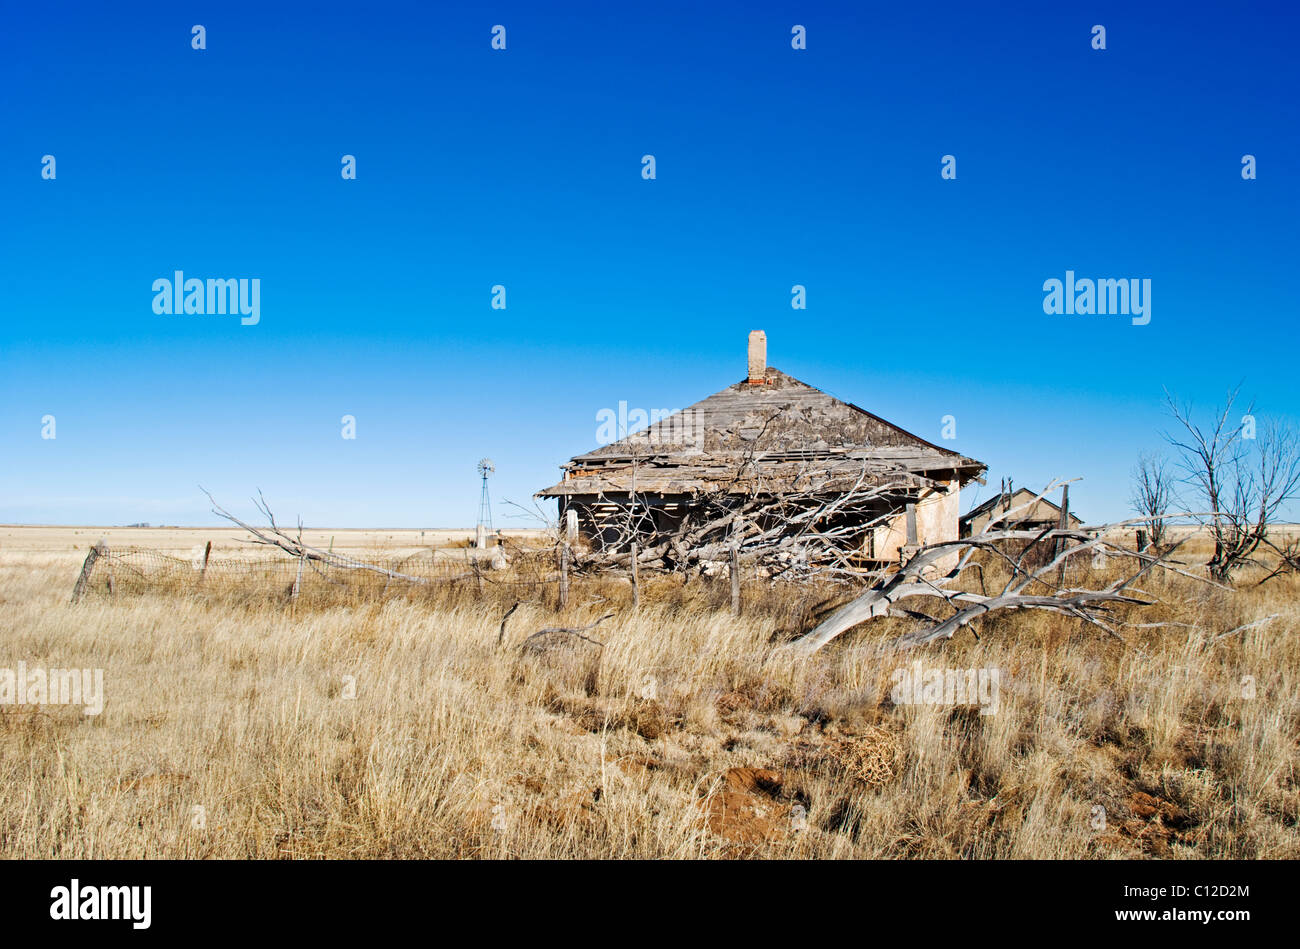 A distant windmill and deserted homestead echoes a more vibrant past in this northeastern portion of New Mexico. Stock Photo